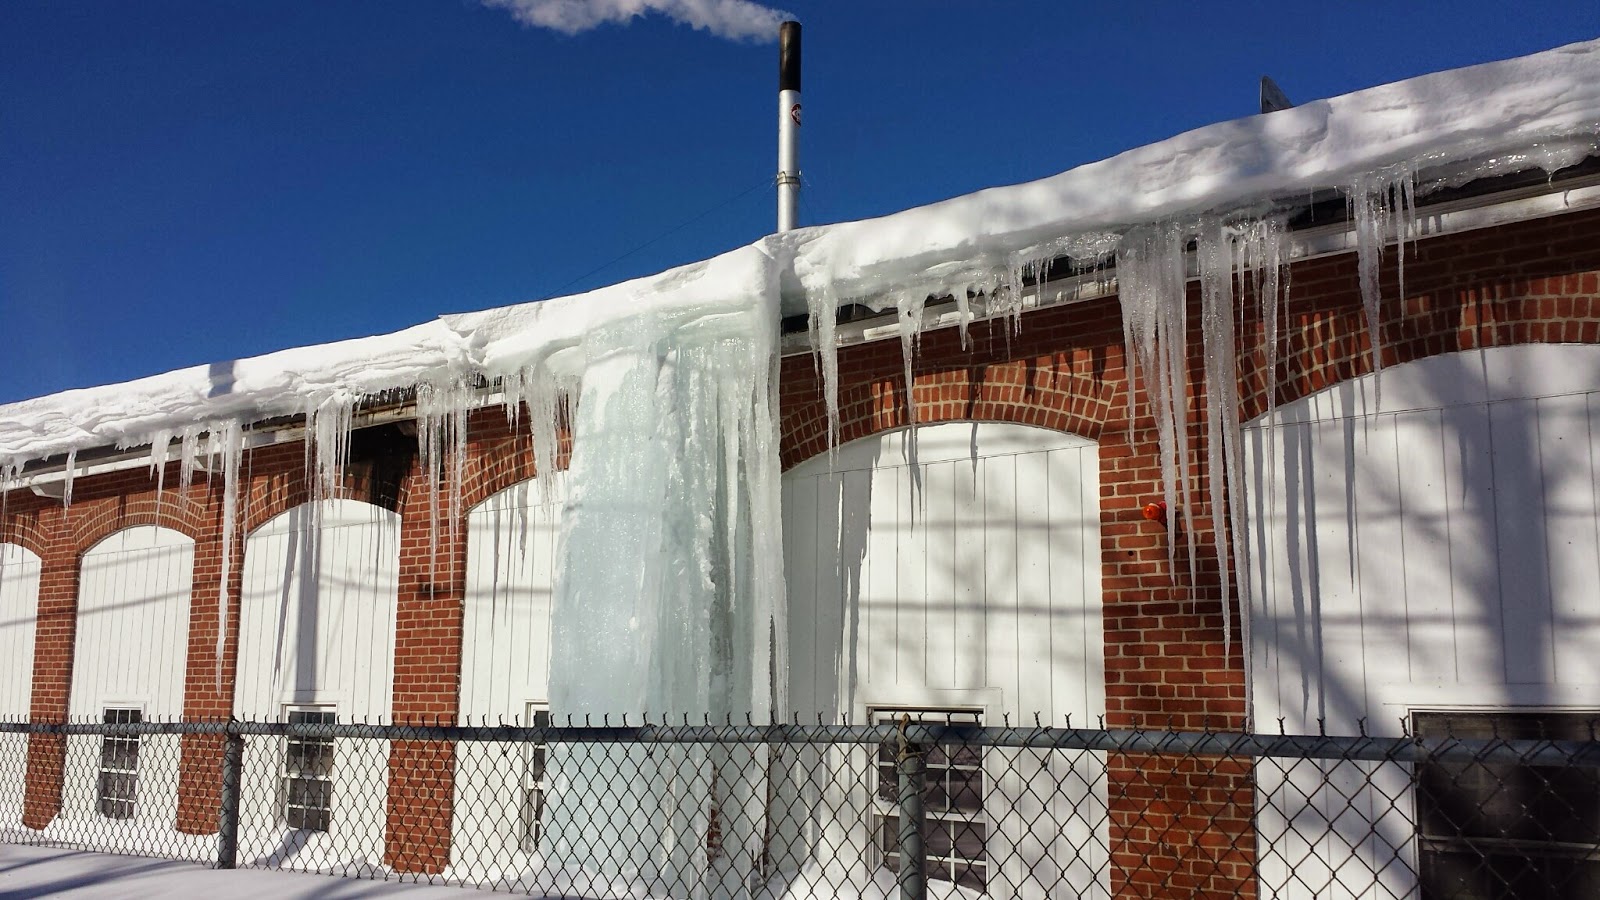 a monster icicle at Clark Cutler on Fisher St